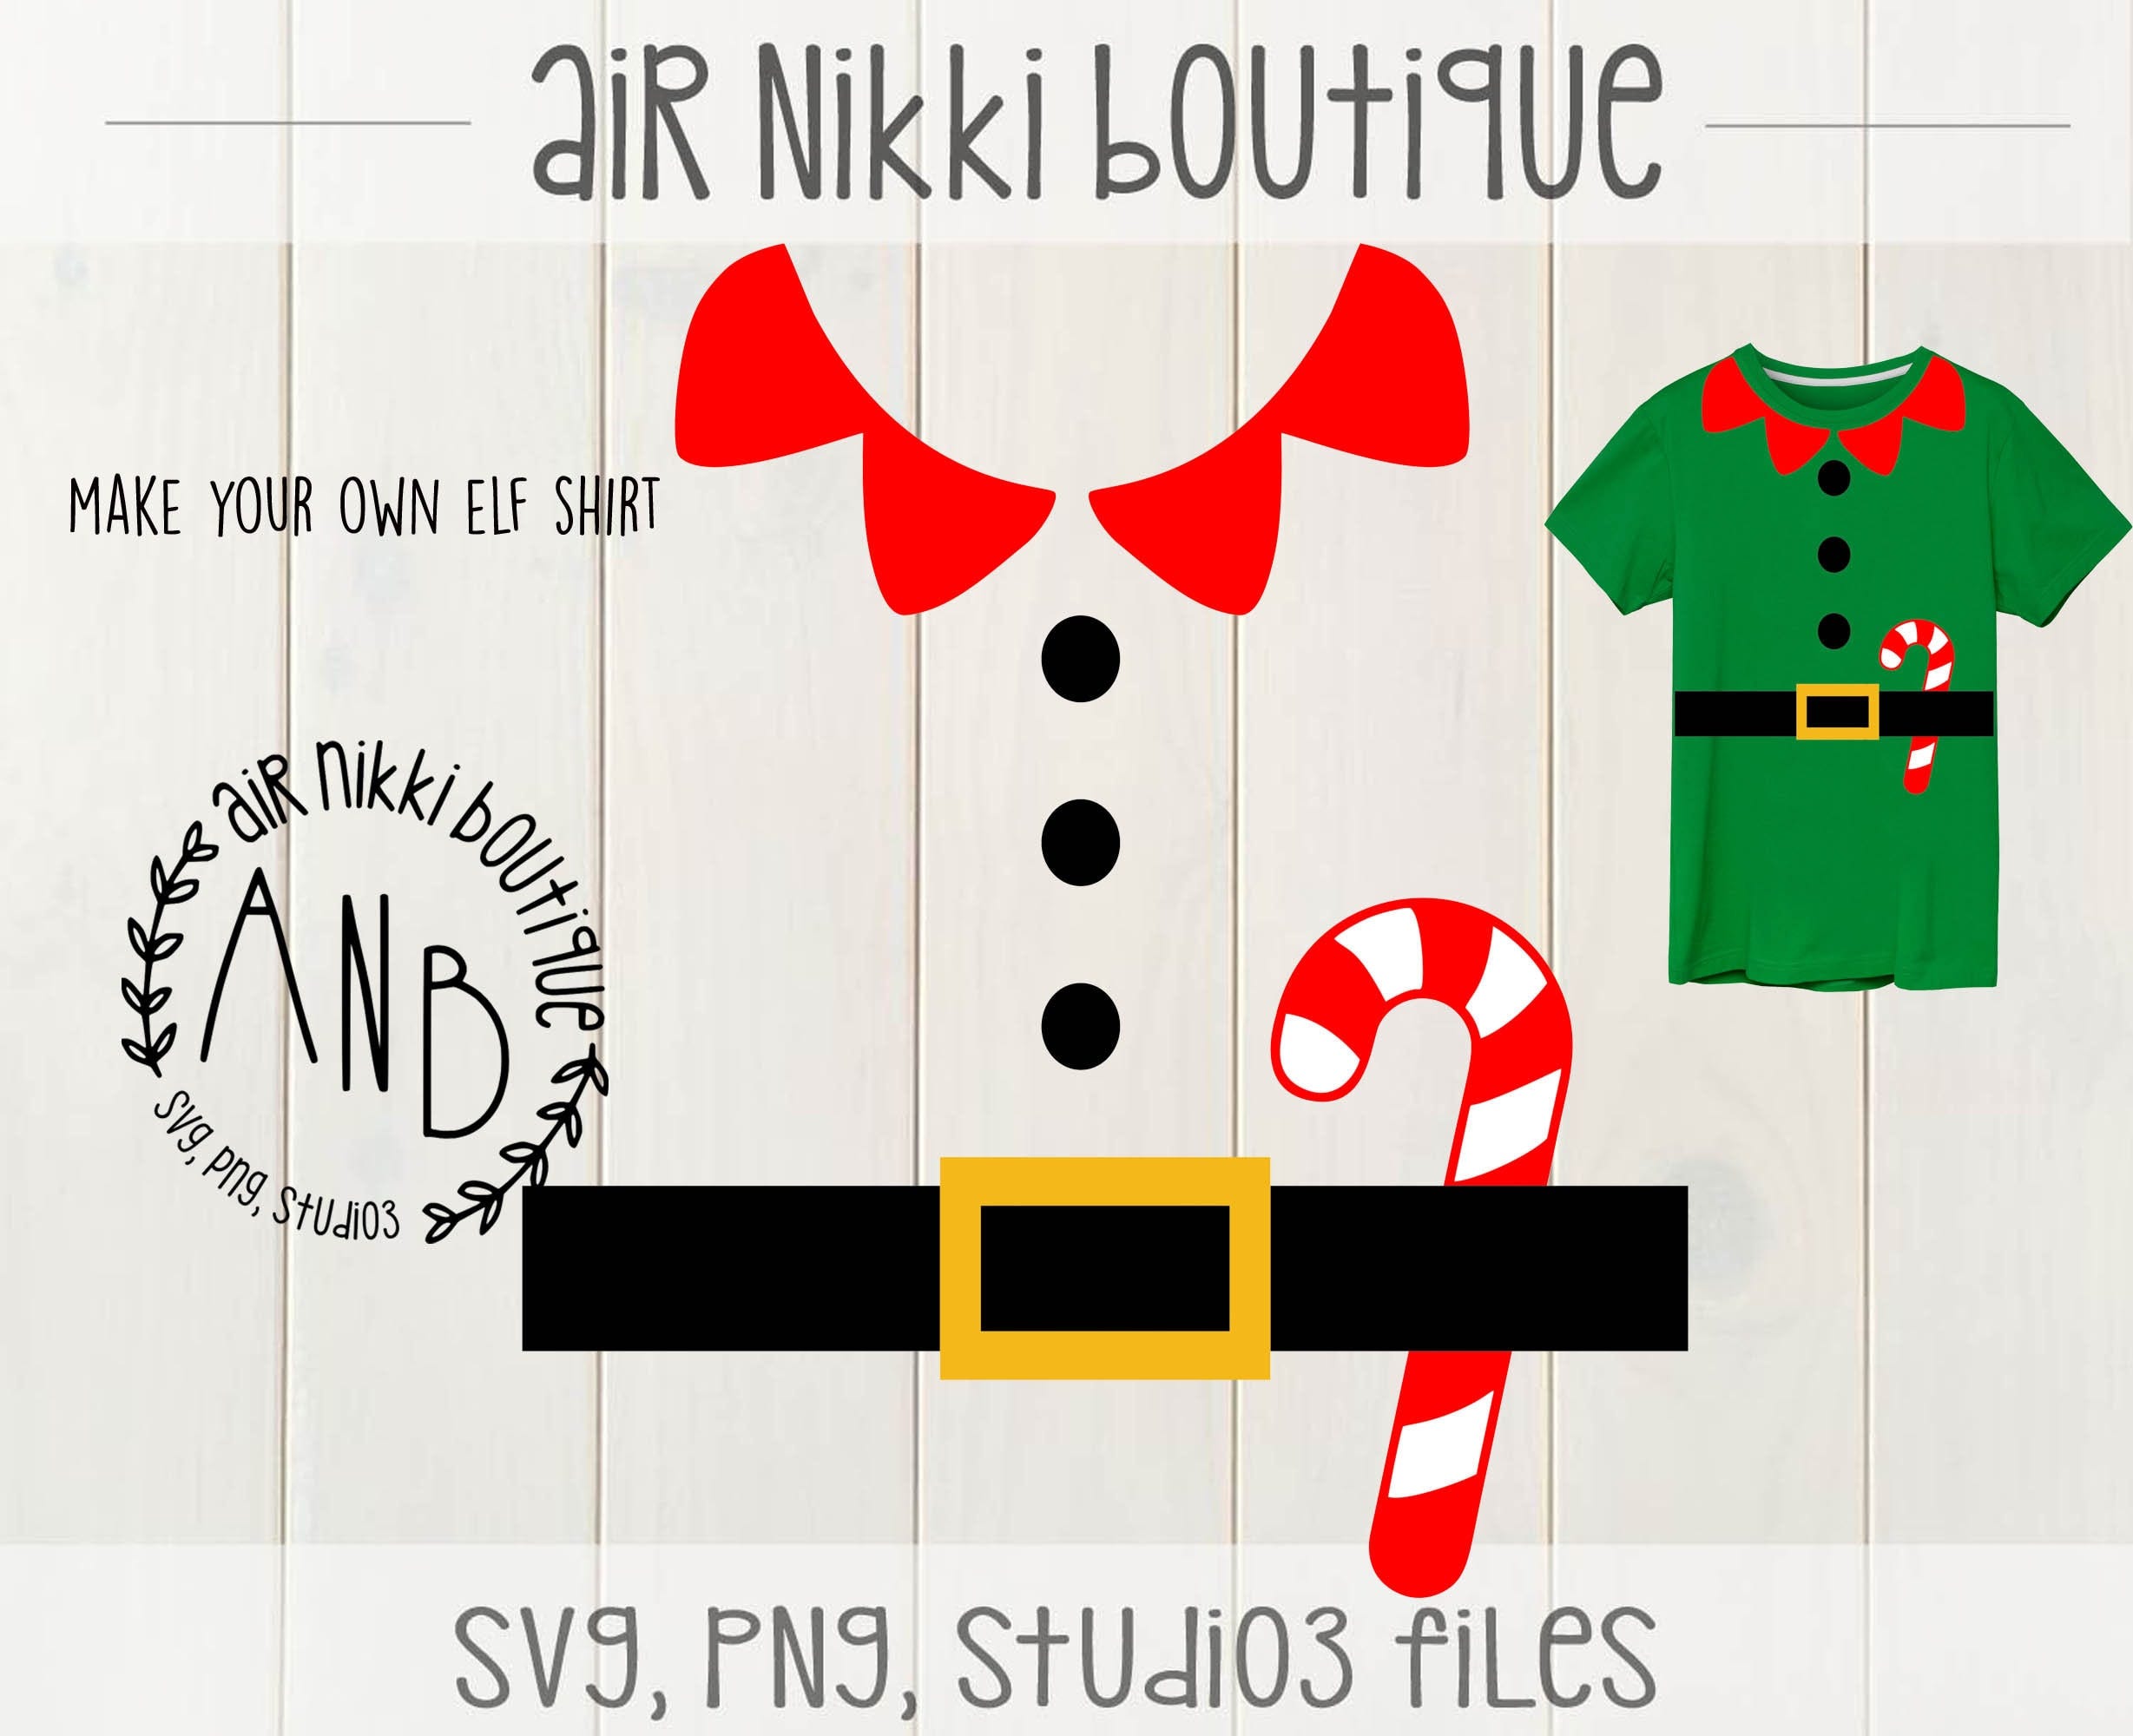 Elf shirt, make your own, play, Christmas party shirt, dress up, SVG, PNG, Studio 3, DXF files, mirrored png, instant download, design space